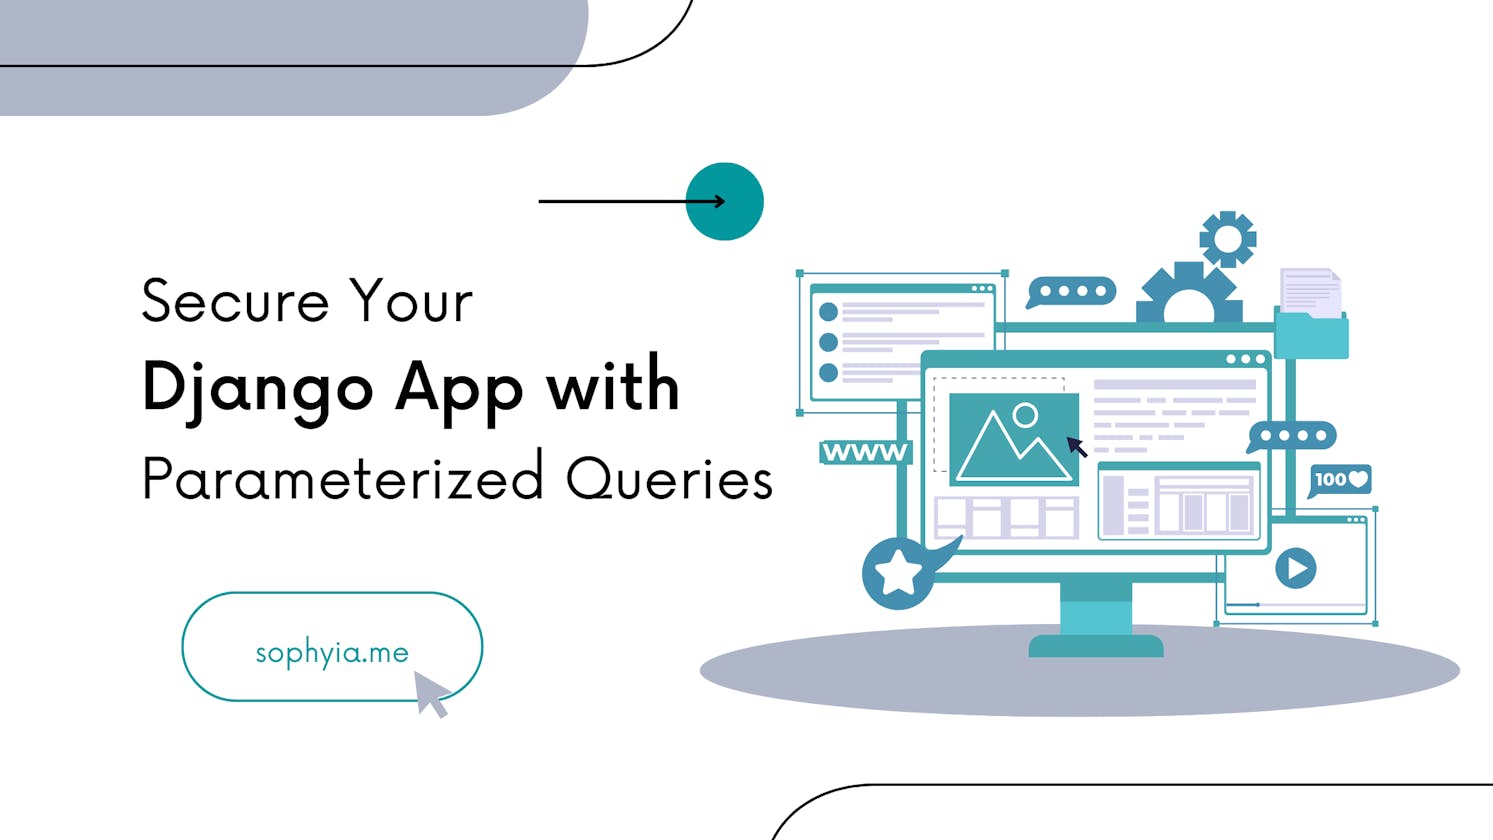 Secure Your Django App with Parameterized Queries